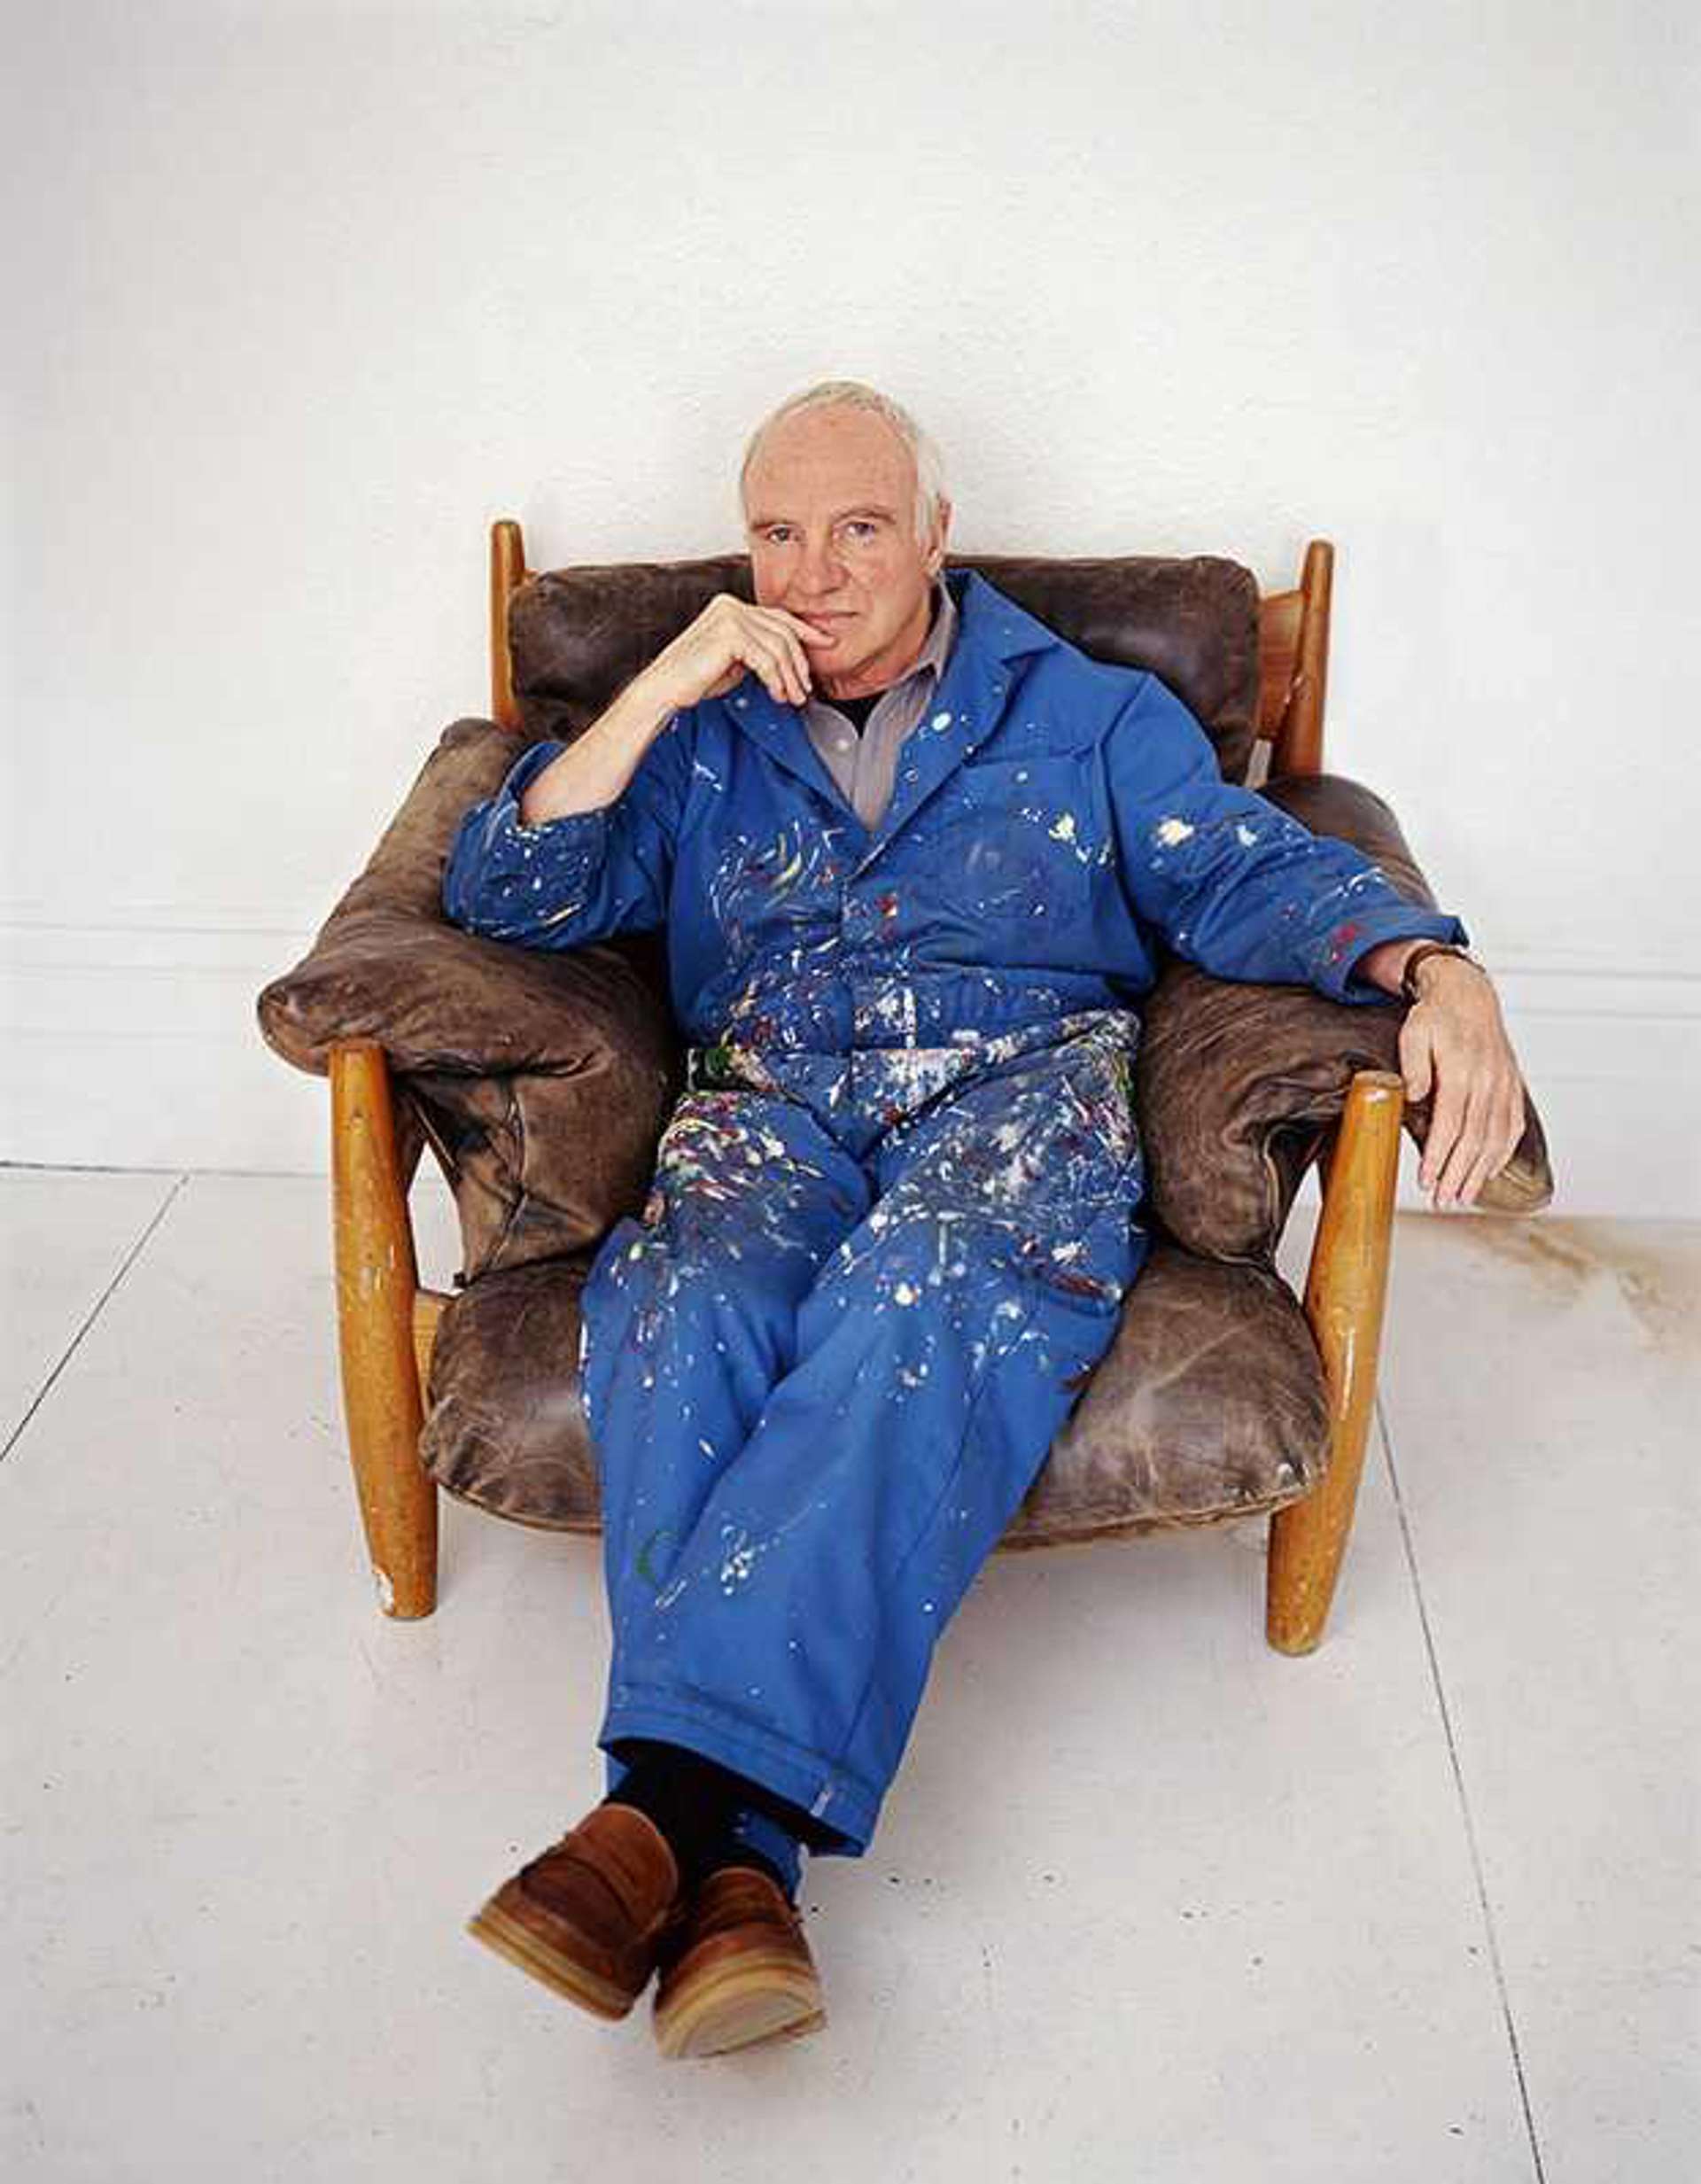 A photograph of artist Patrick Caulfield wearing paint-splattered overalls, sitting in a leather chair against a white background.